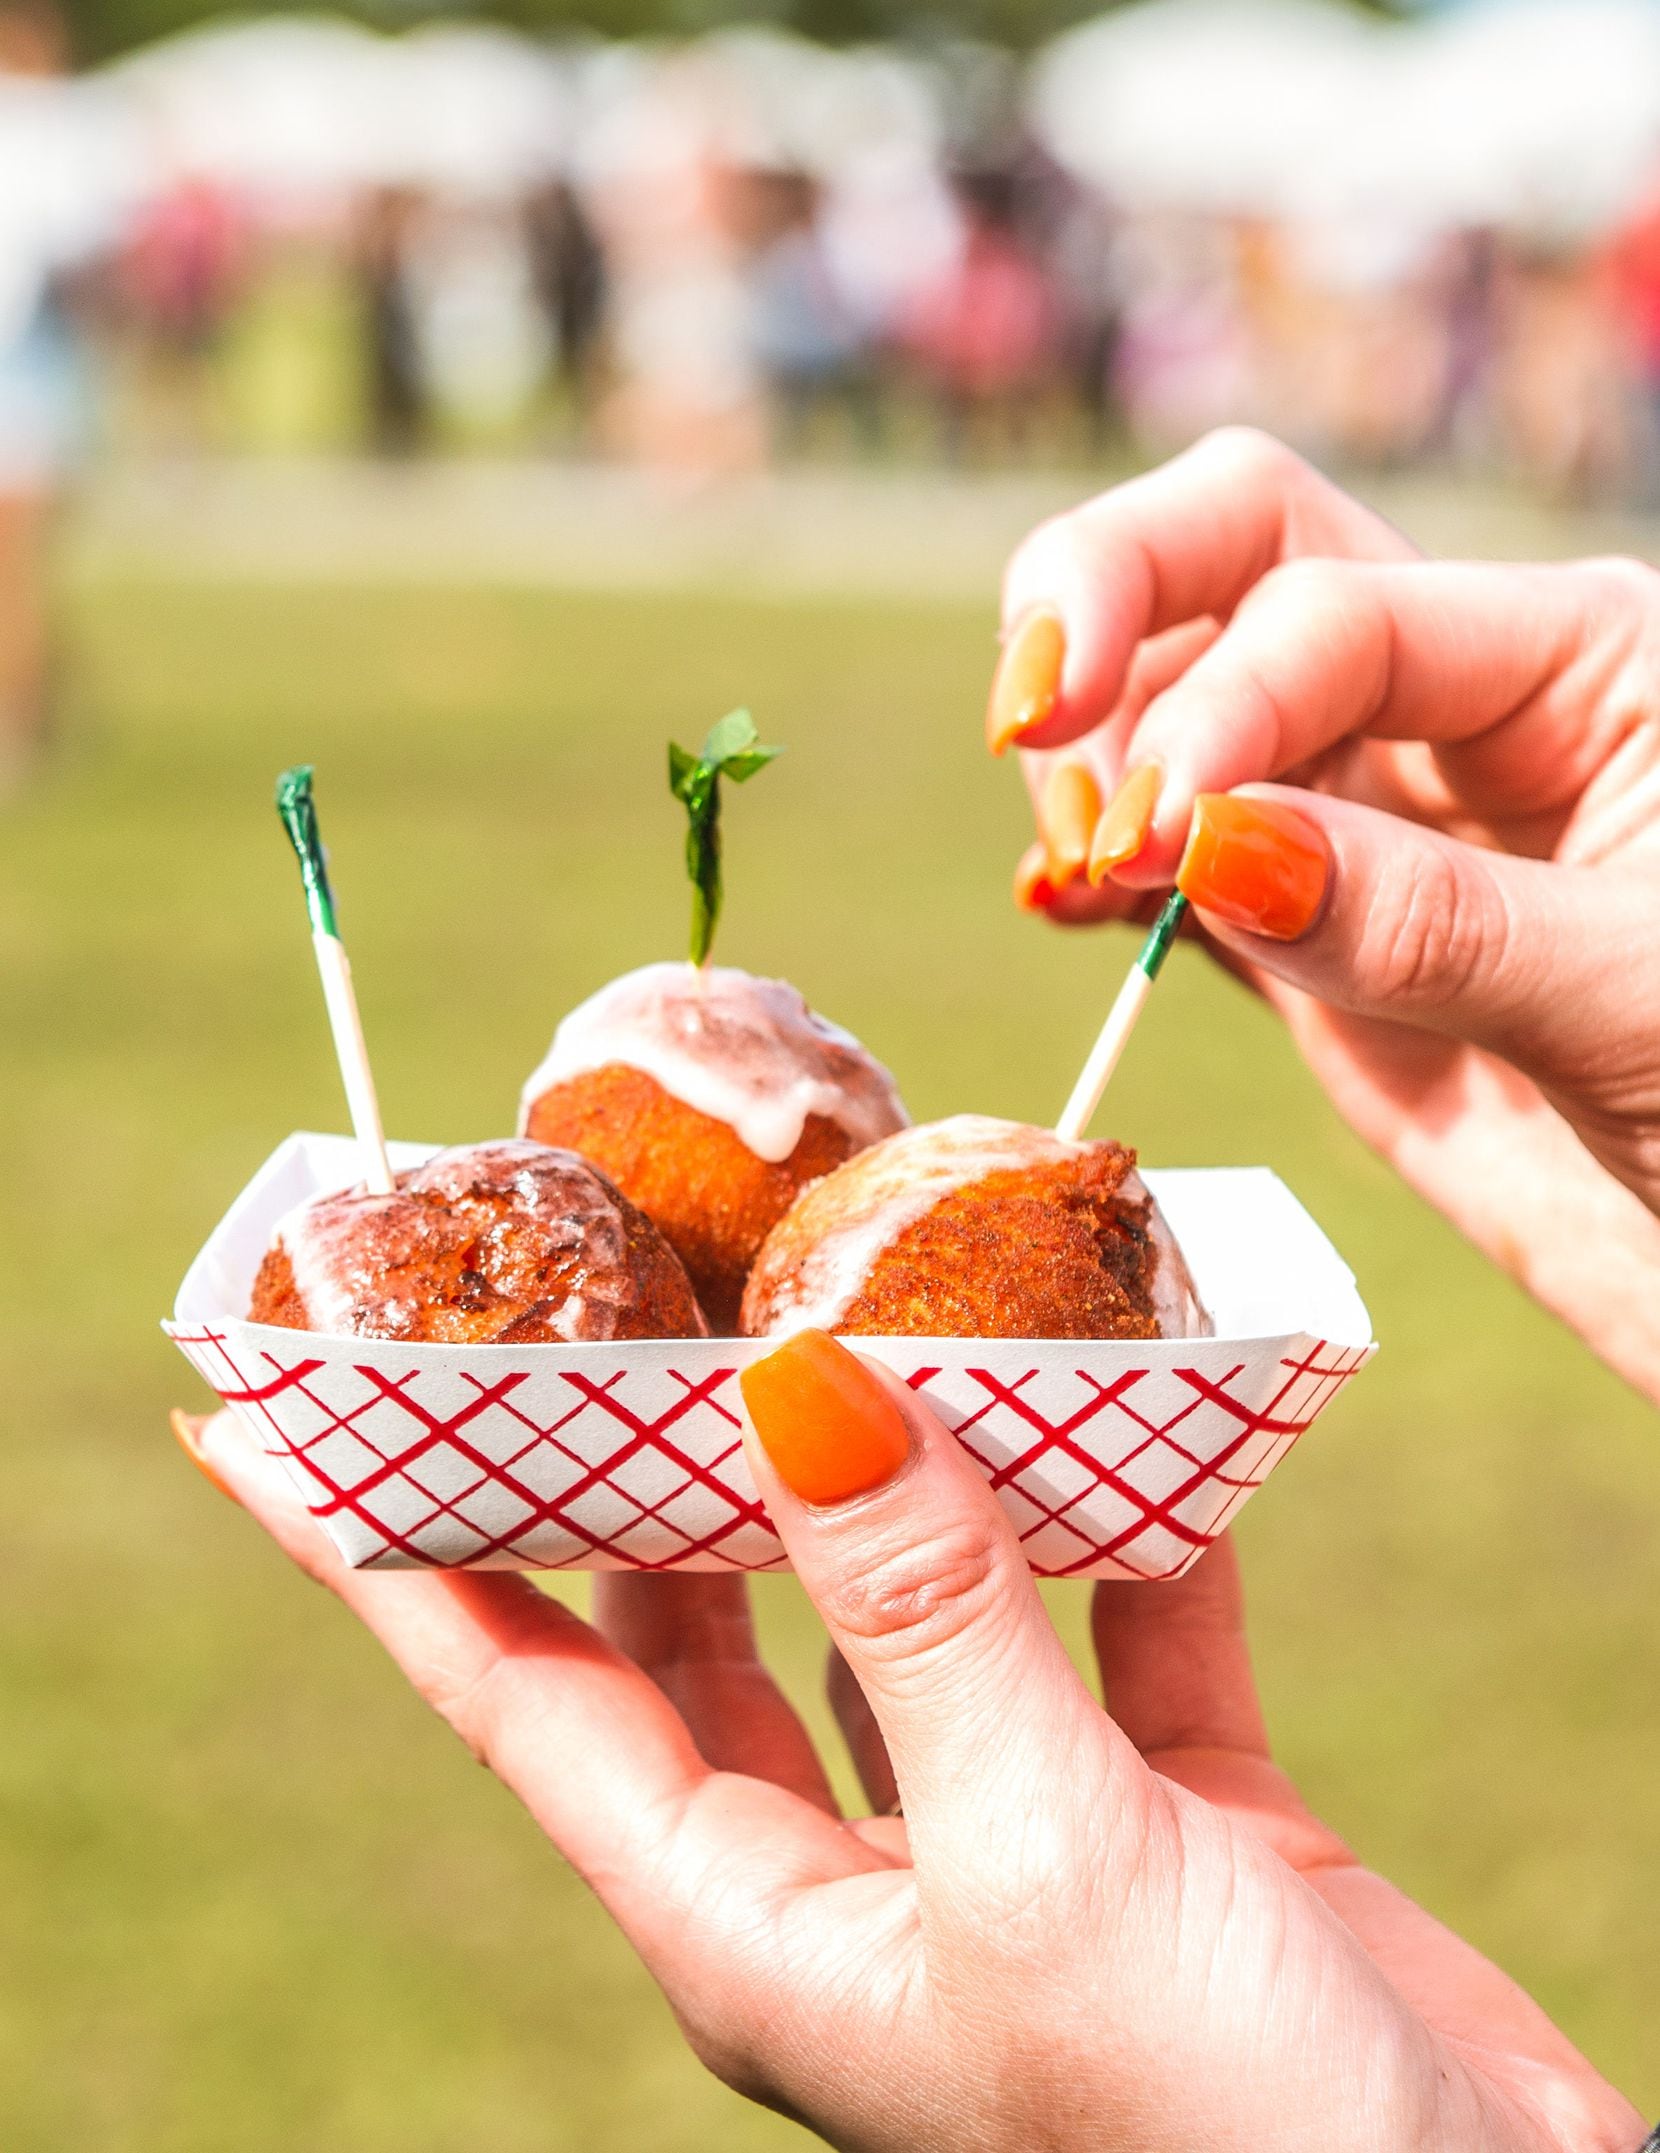 Deep fried watermelon has been a dish at the Vegandale festival.